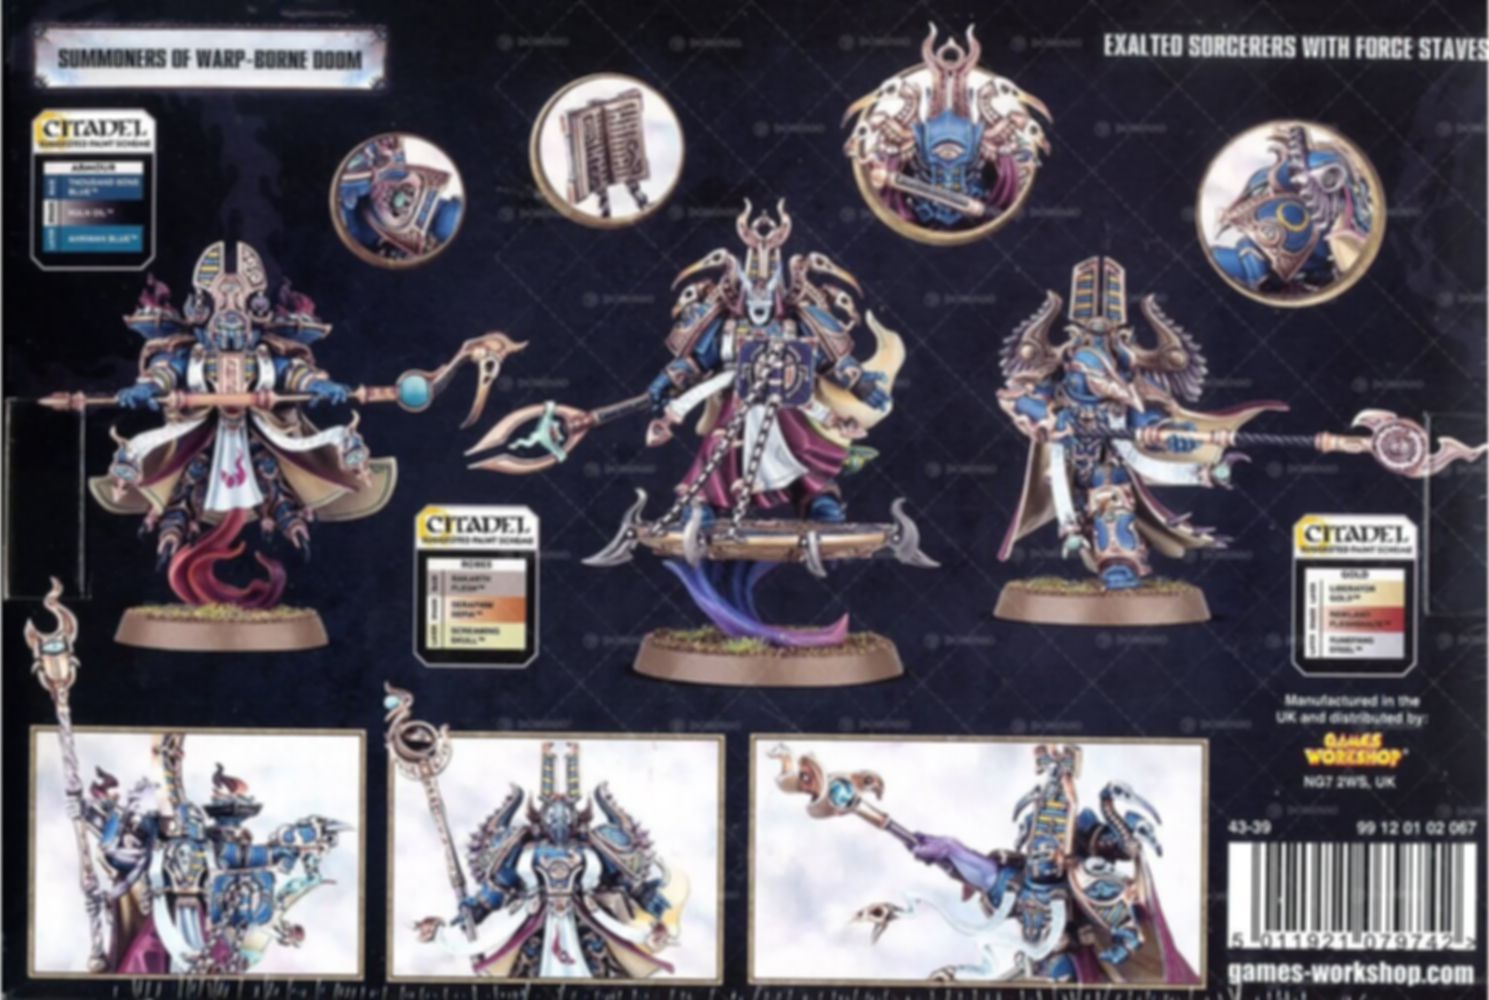 Warhammer 40,000 Chaos Heretic Astartes Thousand Sons: Exalted Sorcerers dos de la boîte